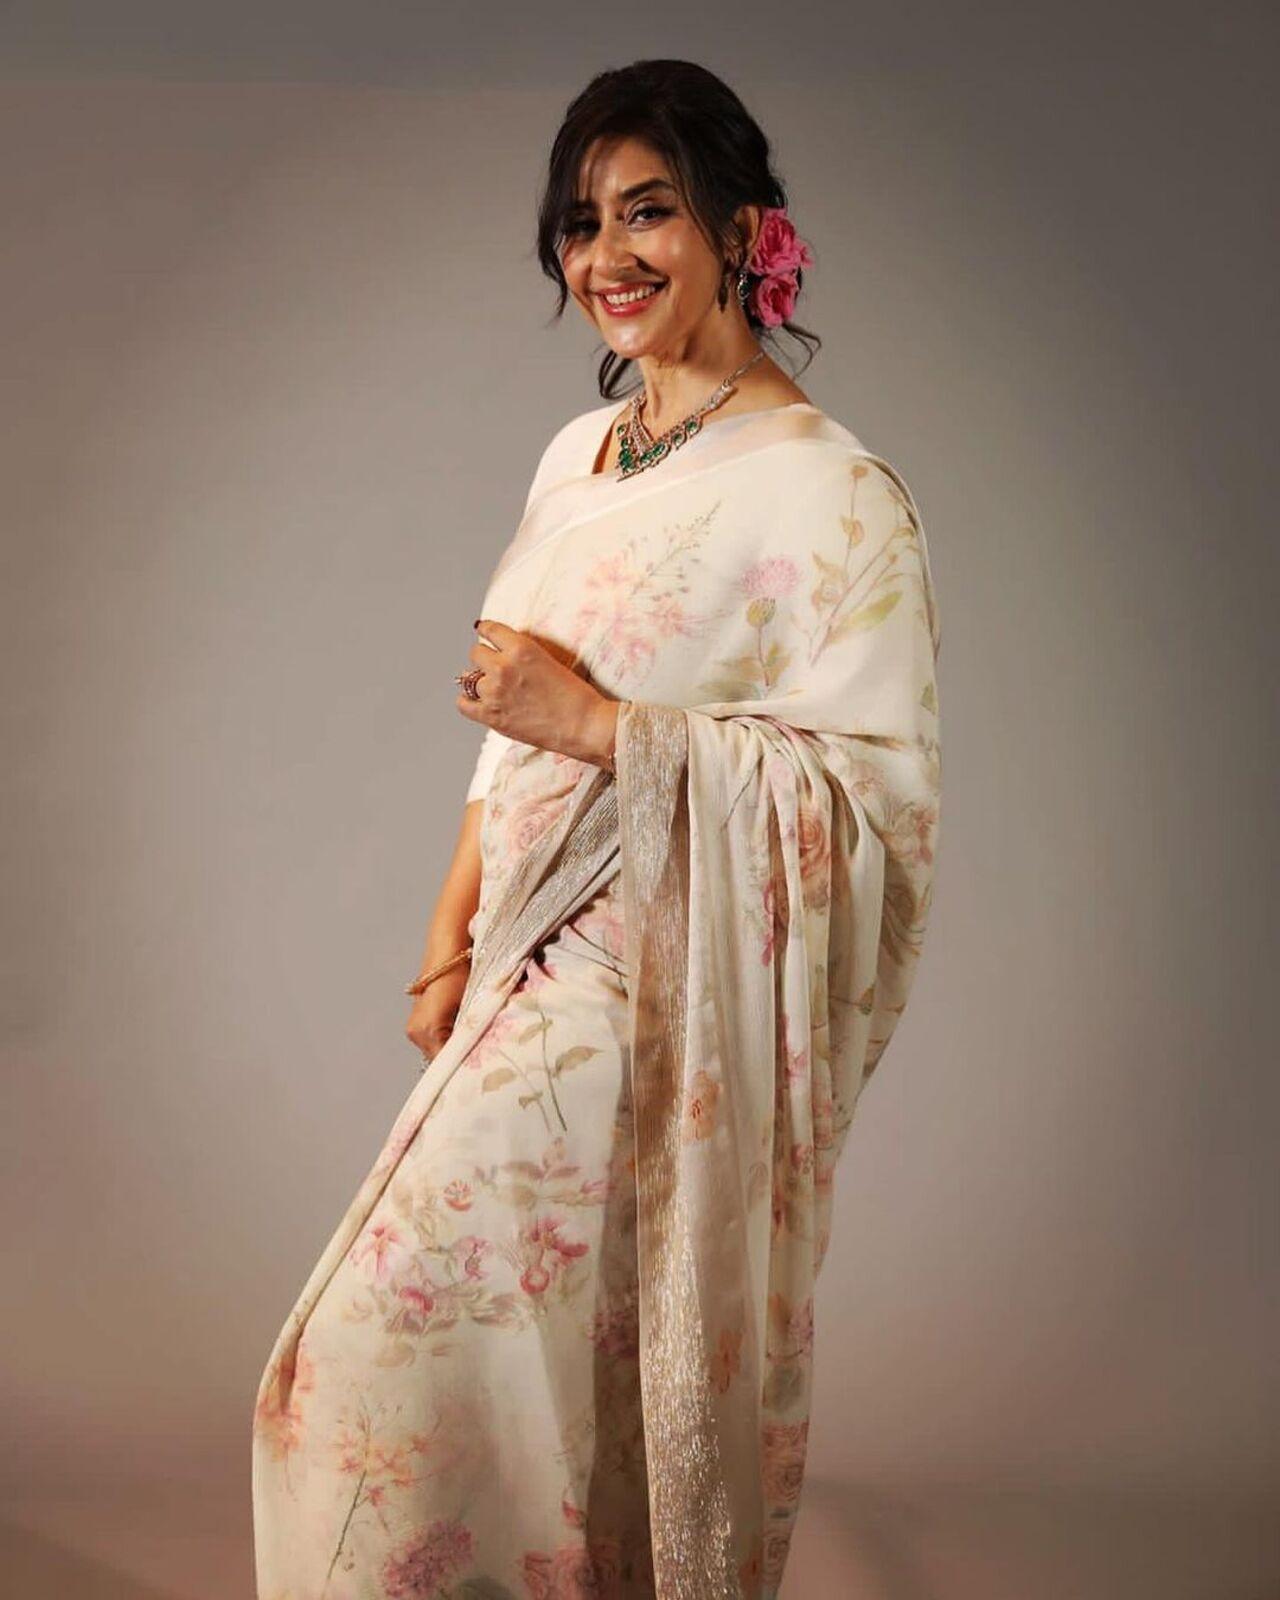 Bhansali reunites with his ‘Khamoshi: The Musical’ actress Manisha Koirala after 28 years. Take a cue from her vintage-style saree look for the festive season. 